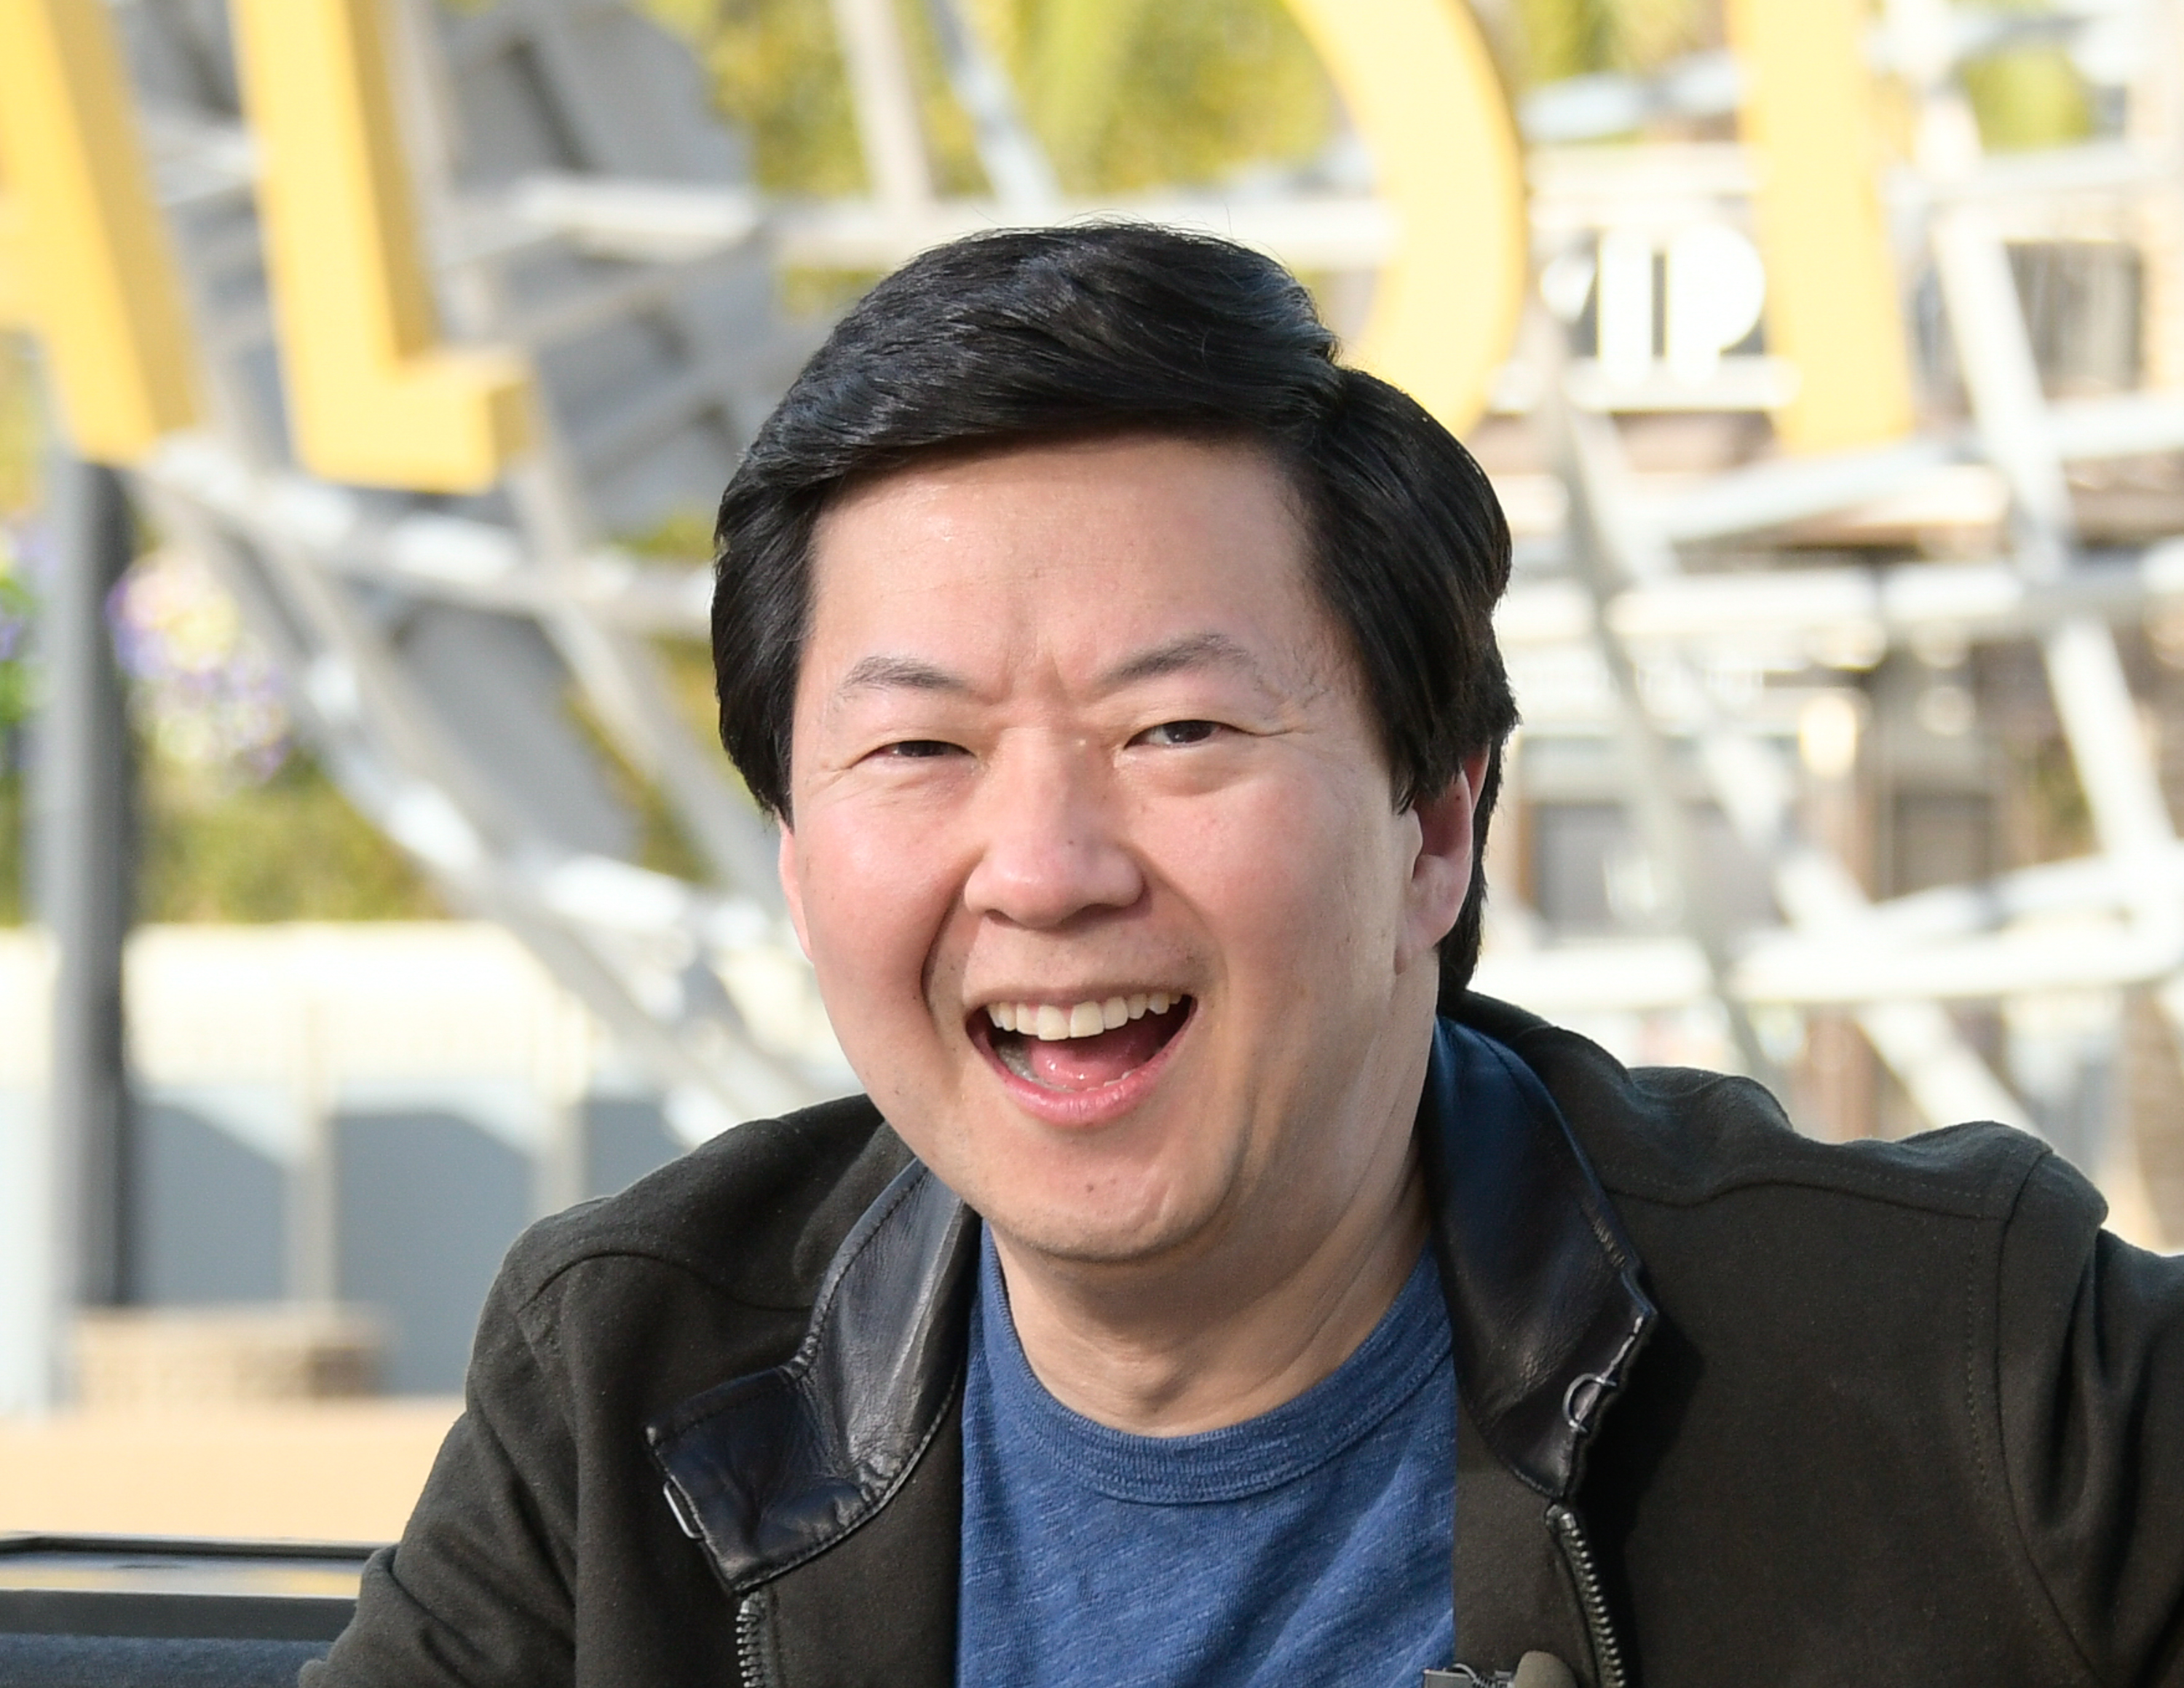 Ken Jeong visits "Extra" at Universal Studios Hollywood in Universal City, California on February 16, 2017. (Noel Vasquez—Getty Images)